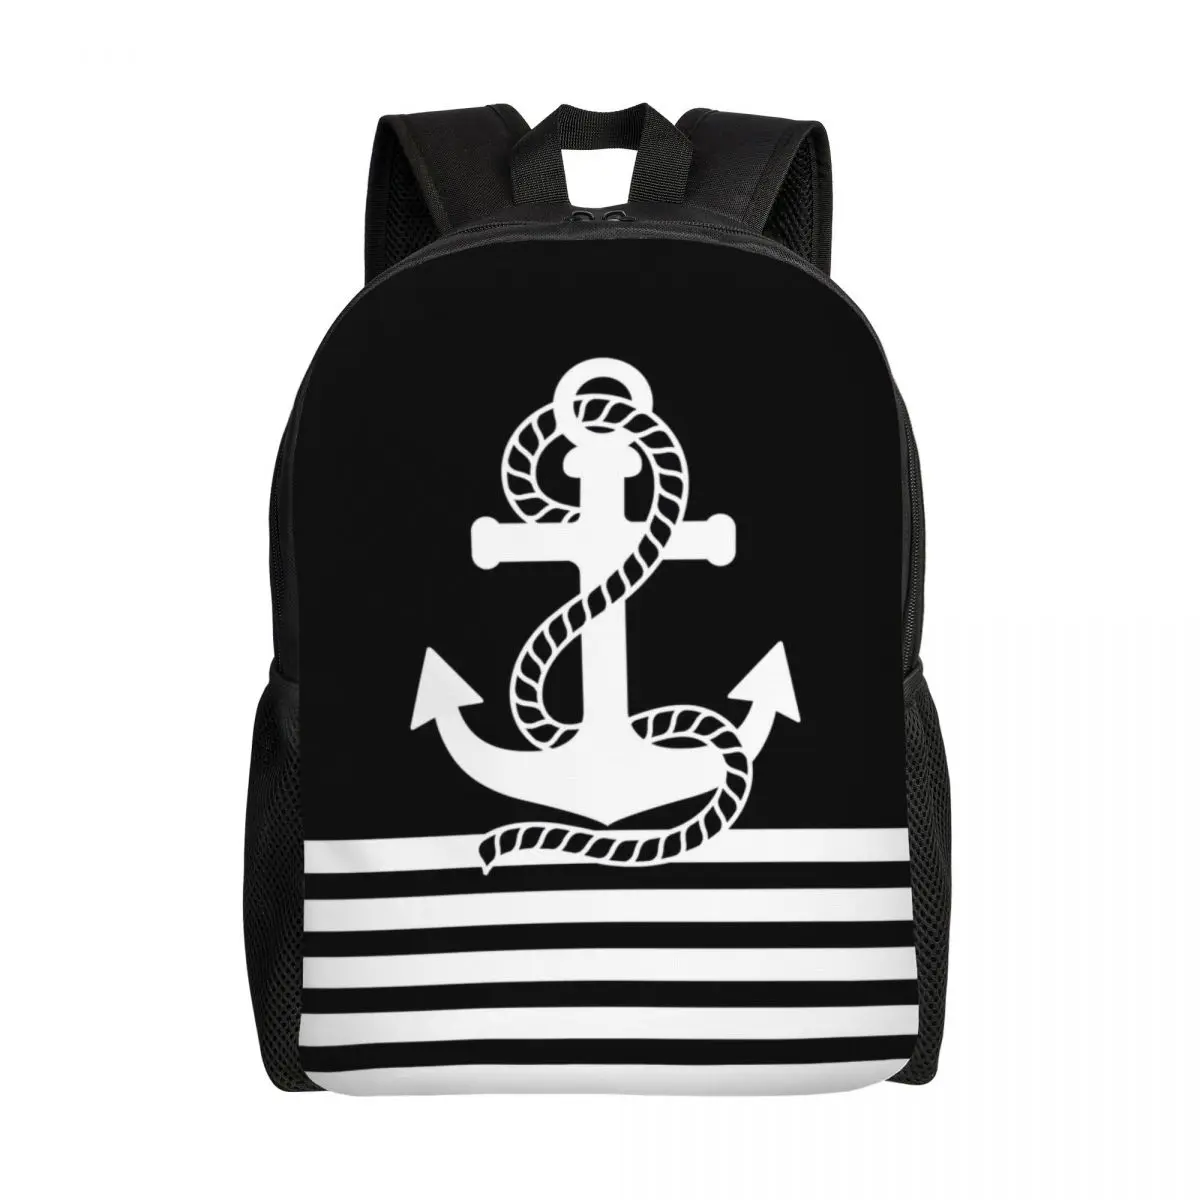 

Black White Nautical Stripes And Anchor Backpack for Boys Girls Sailing Sailor College School Travel Bags Bookbag 15 Inch Laptop